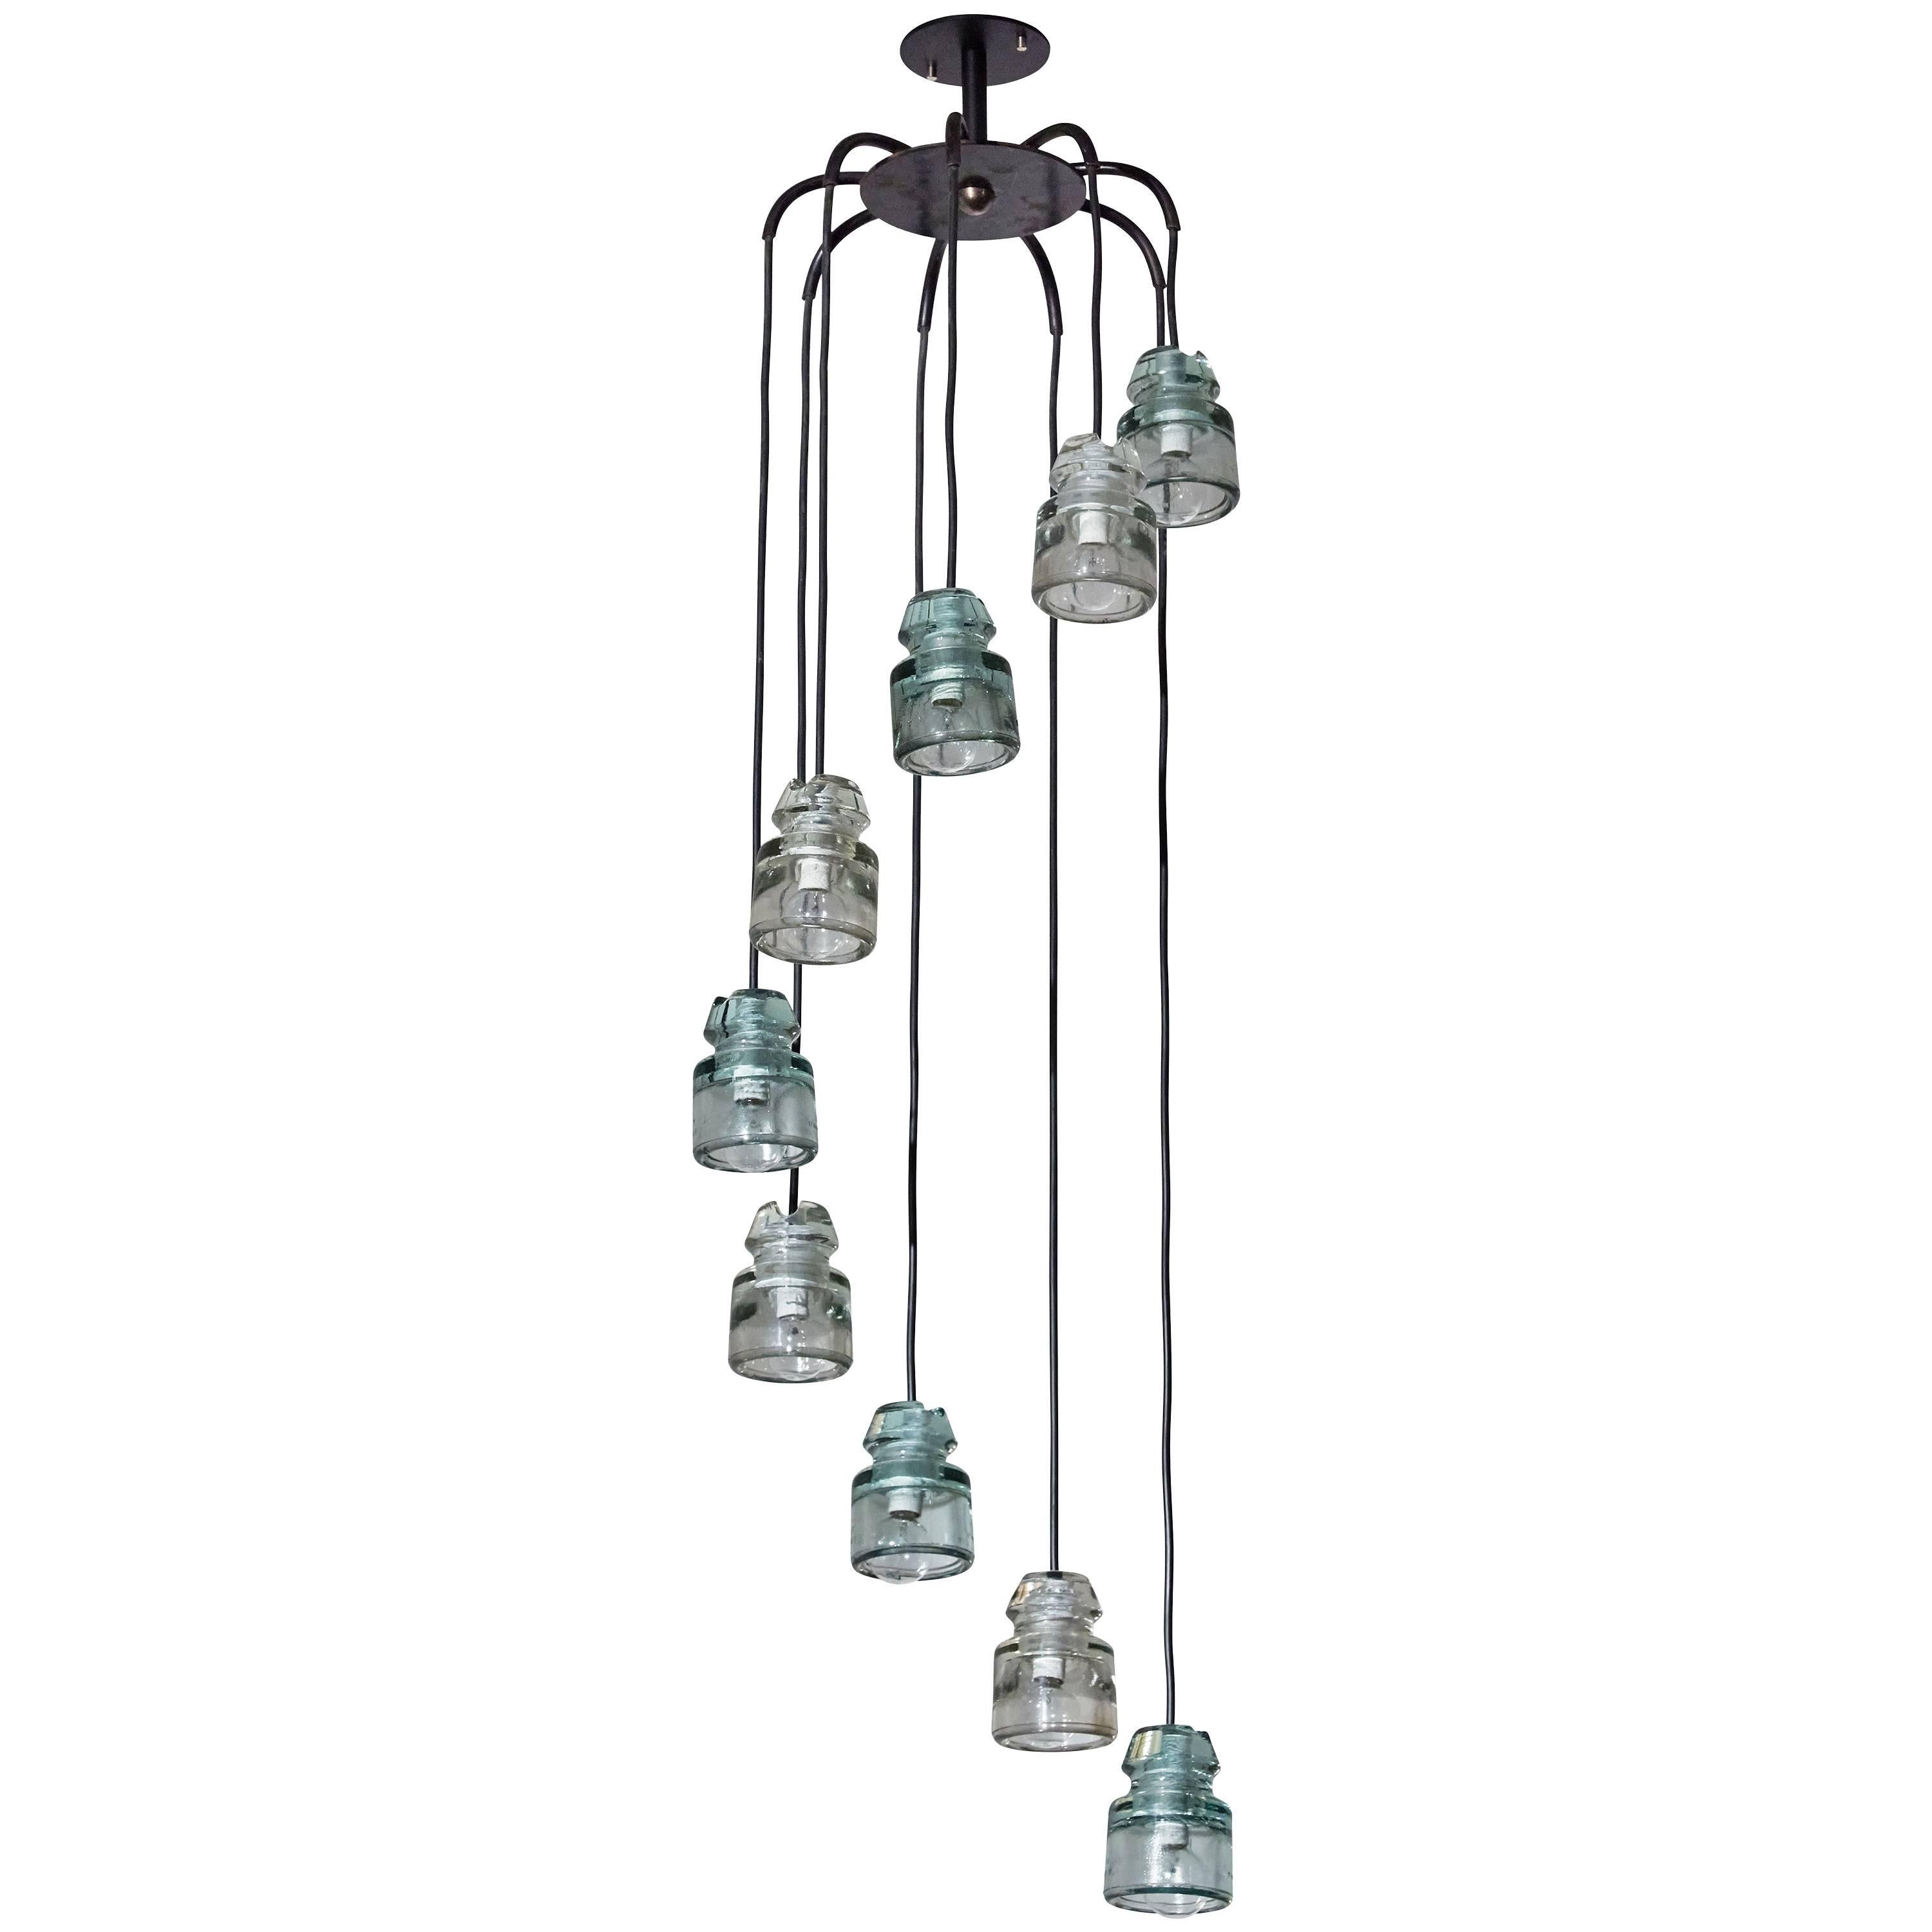 Cascading Glass Chandelier by Tito Agnoli for Oluce